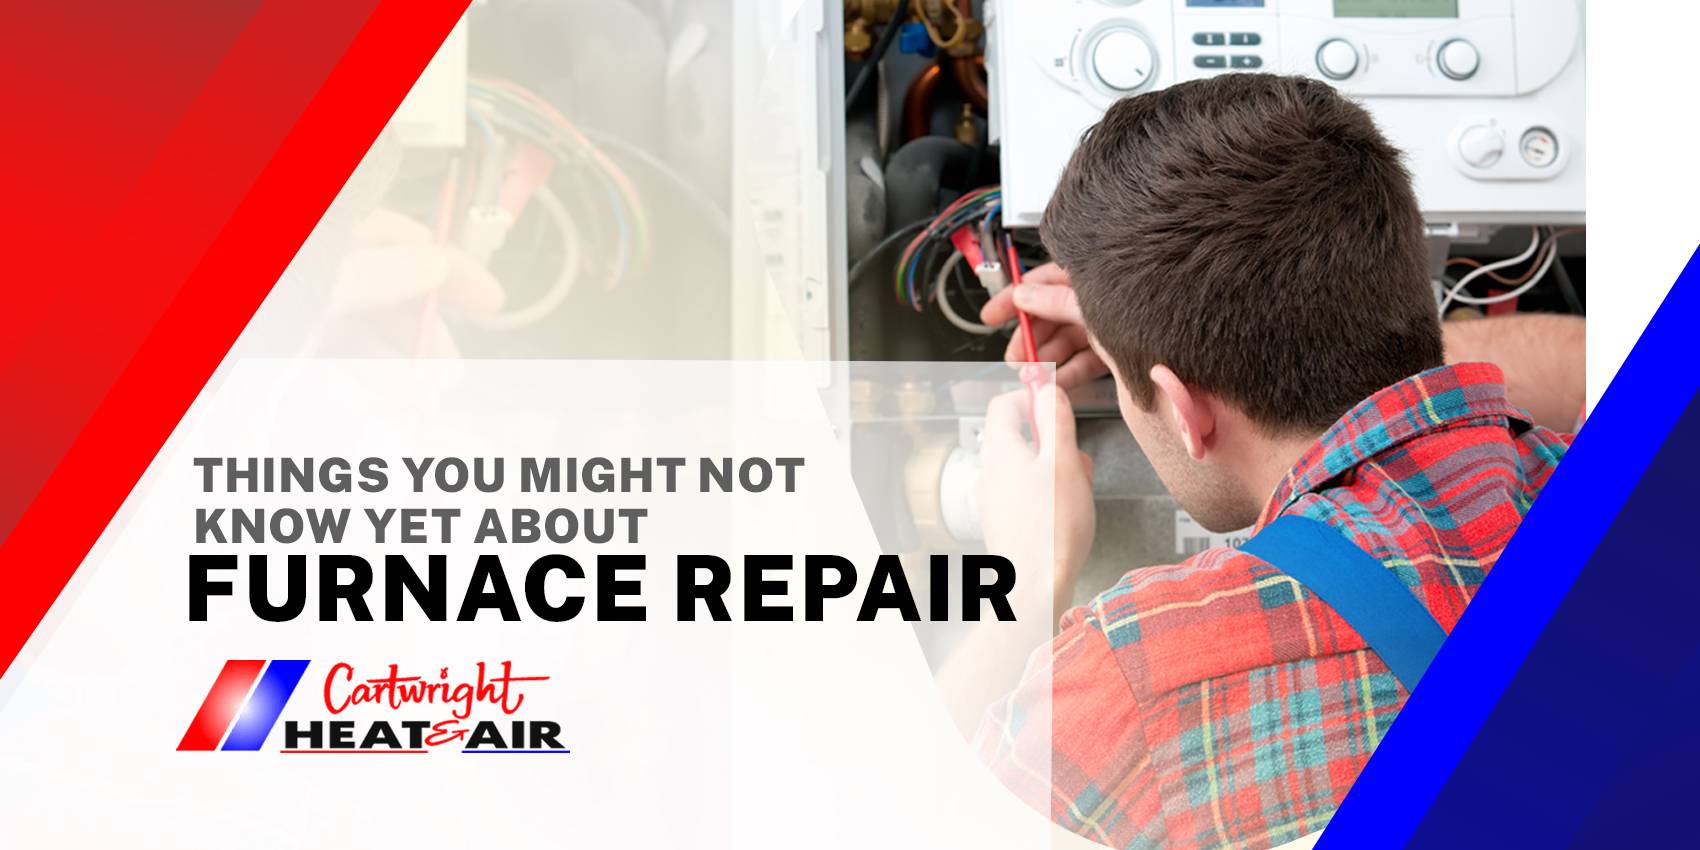 Things You Might Not Know Yet About Furnace Repair